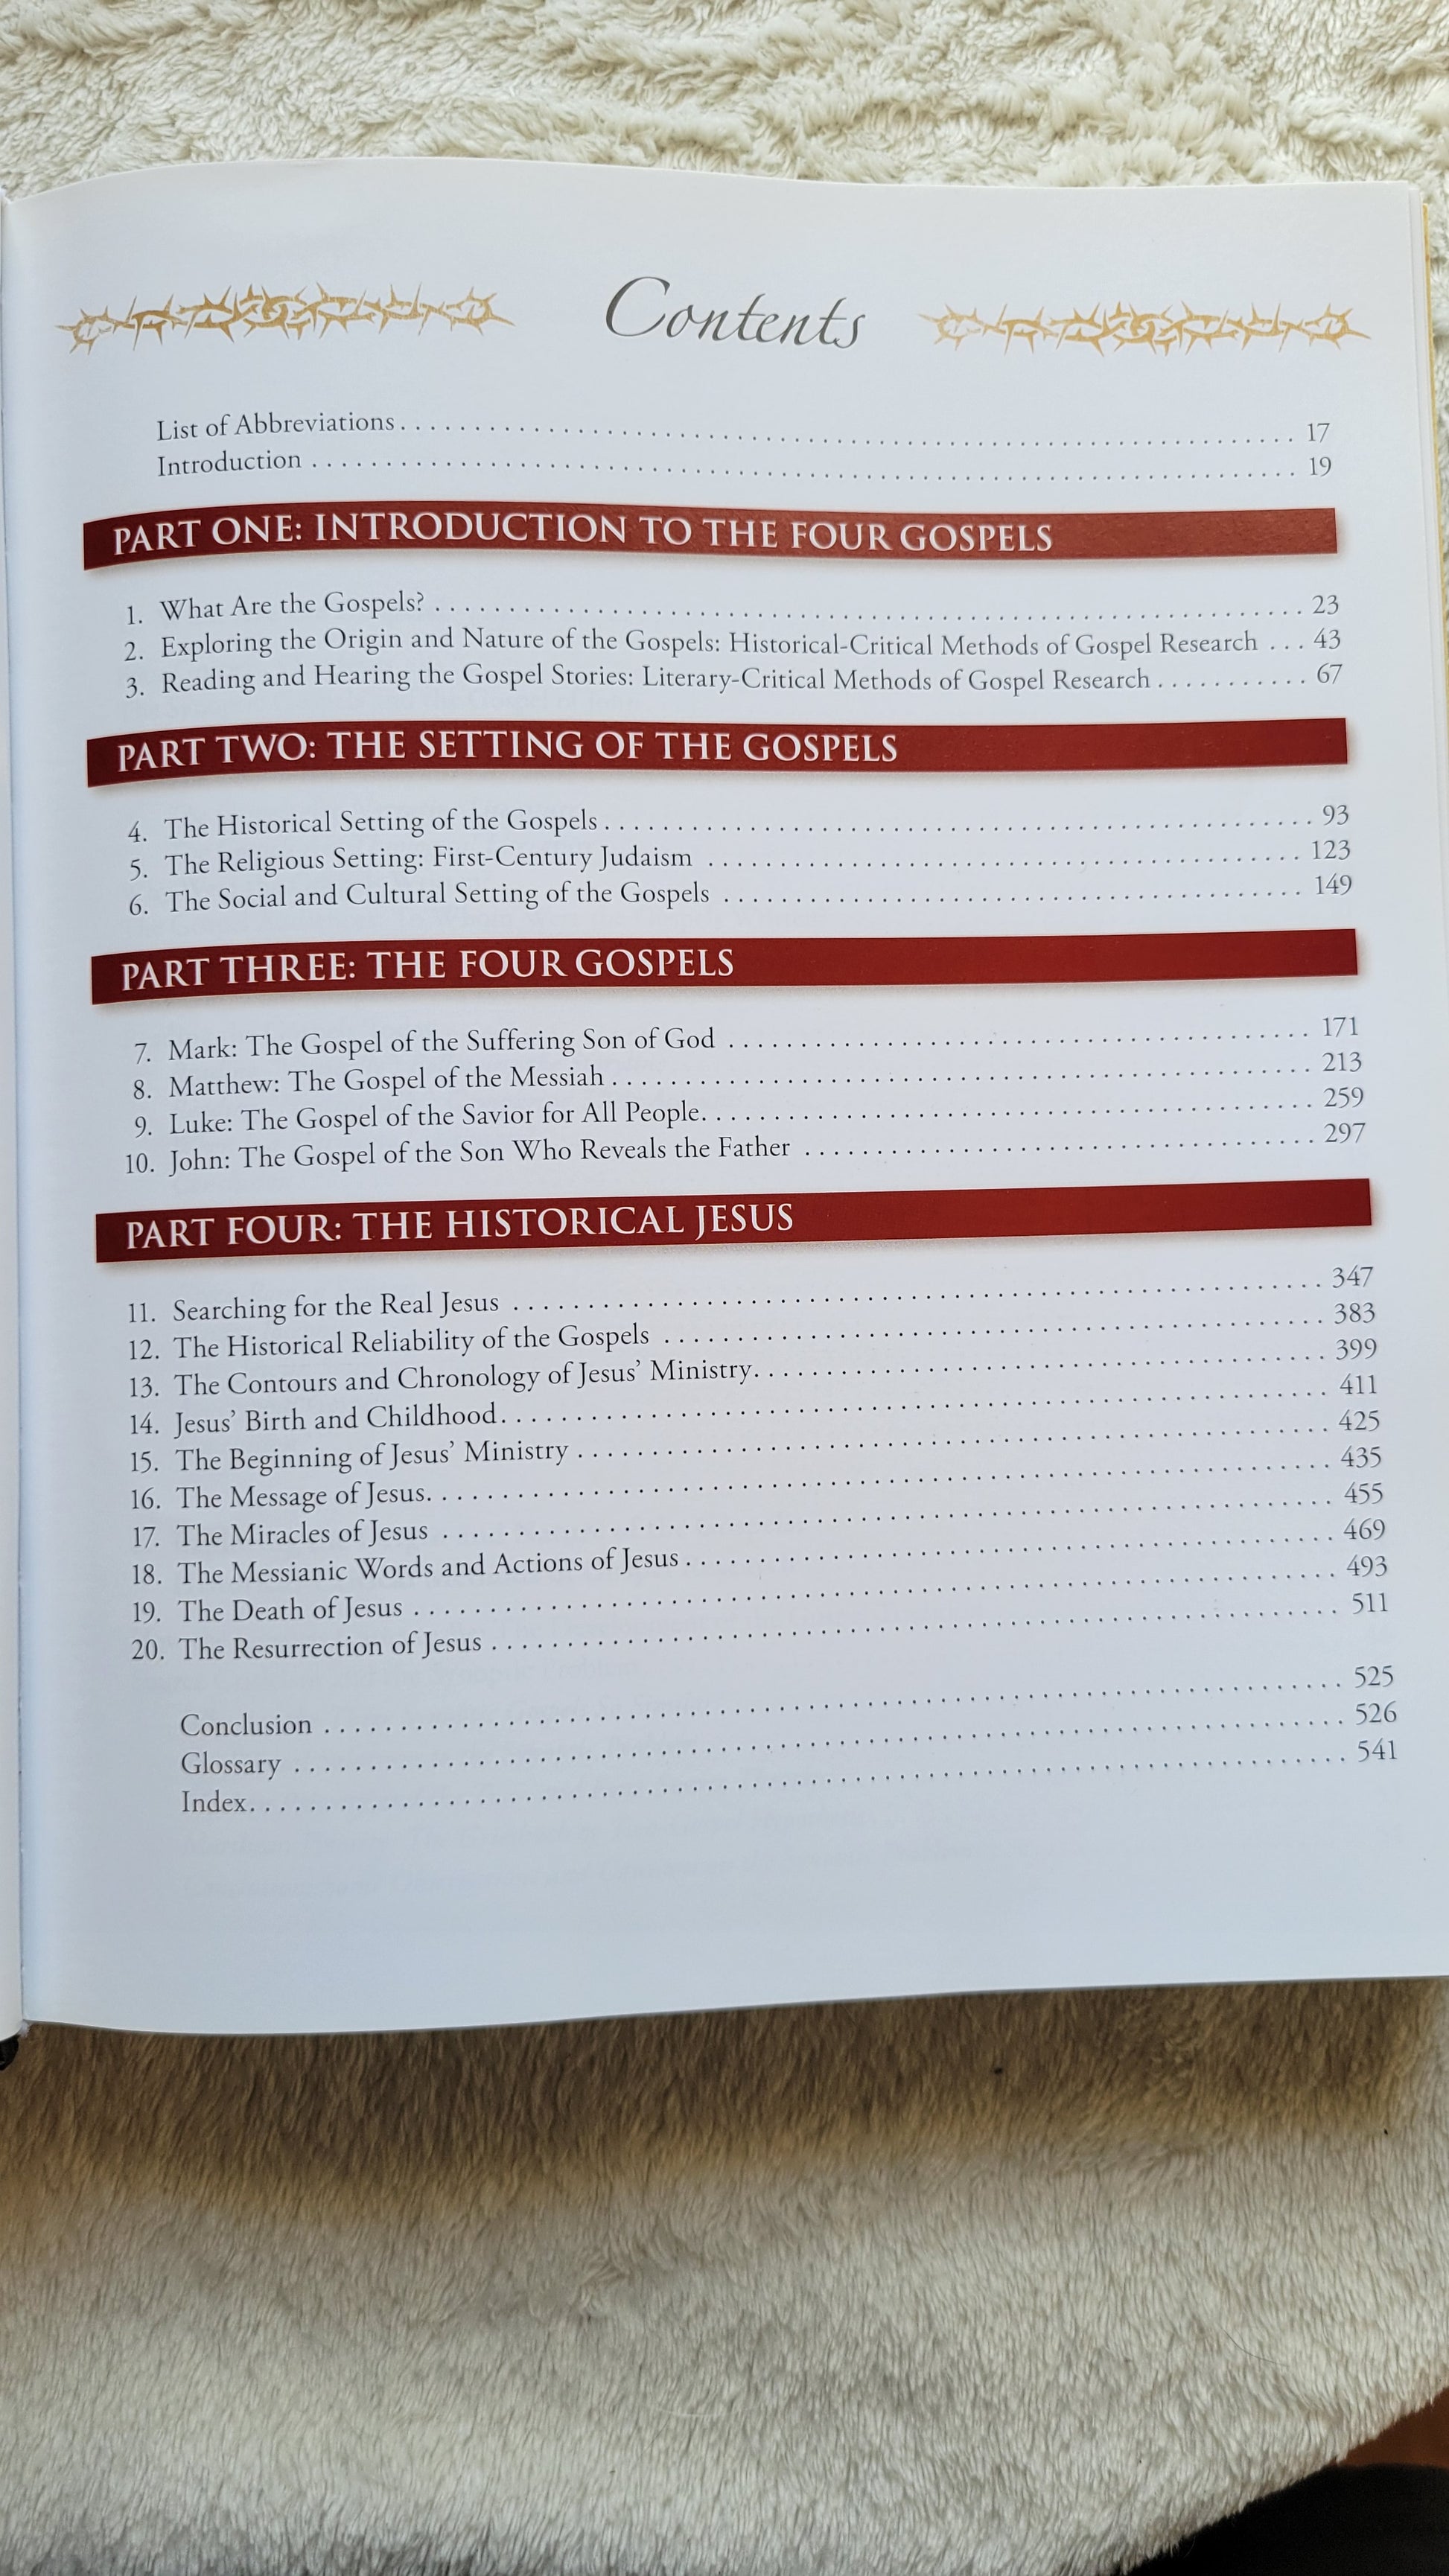 Used book for sale, "Four Portraits One Jesus: A Survey of Jesus and the Gospels", written by Mark L. Strauss in 2007, published by Zondervan.  Investigating the historical Jesus and reliability of the Gospels.  View of table of contents.